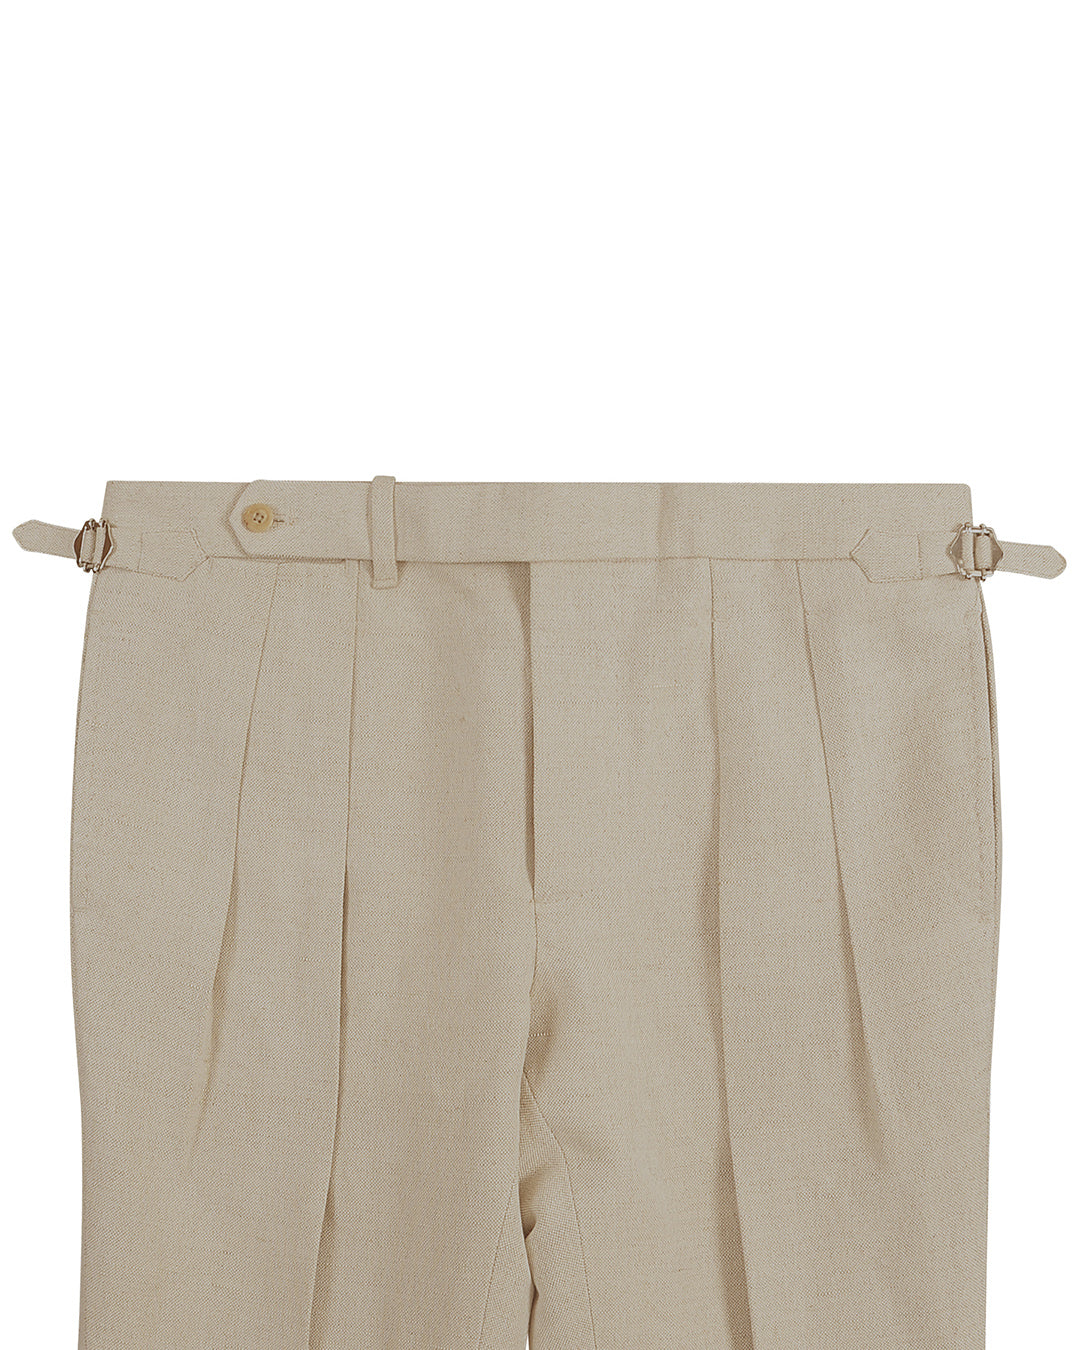 Front view of custom linen canvas pants for men by Luxire in jute brown